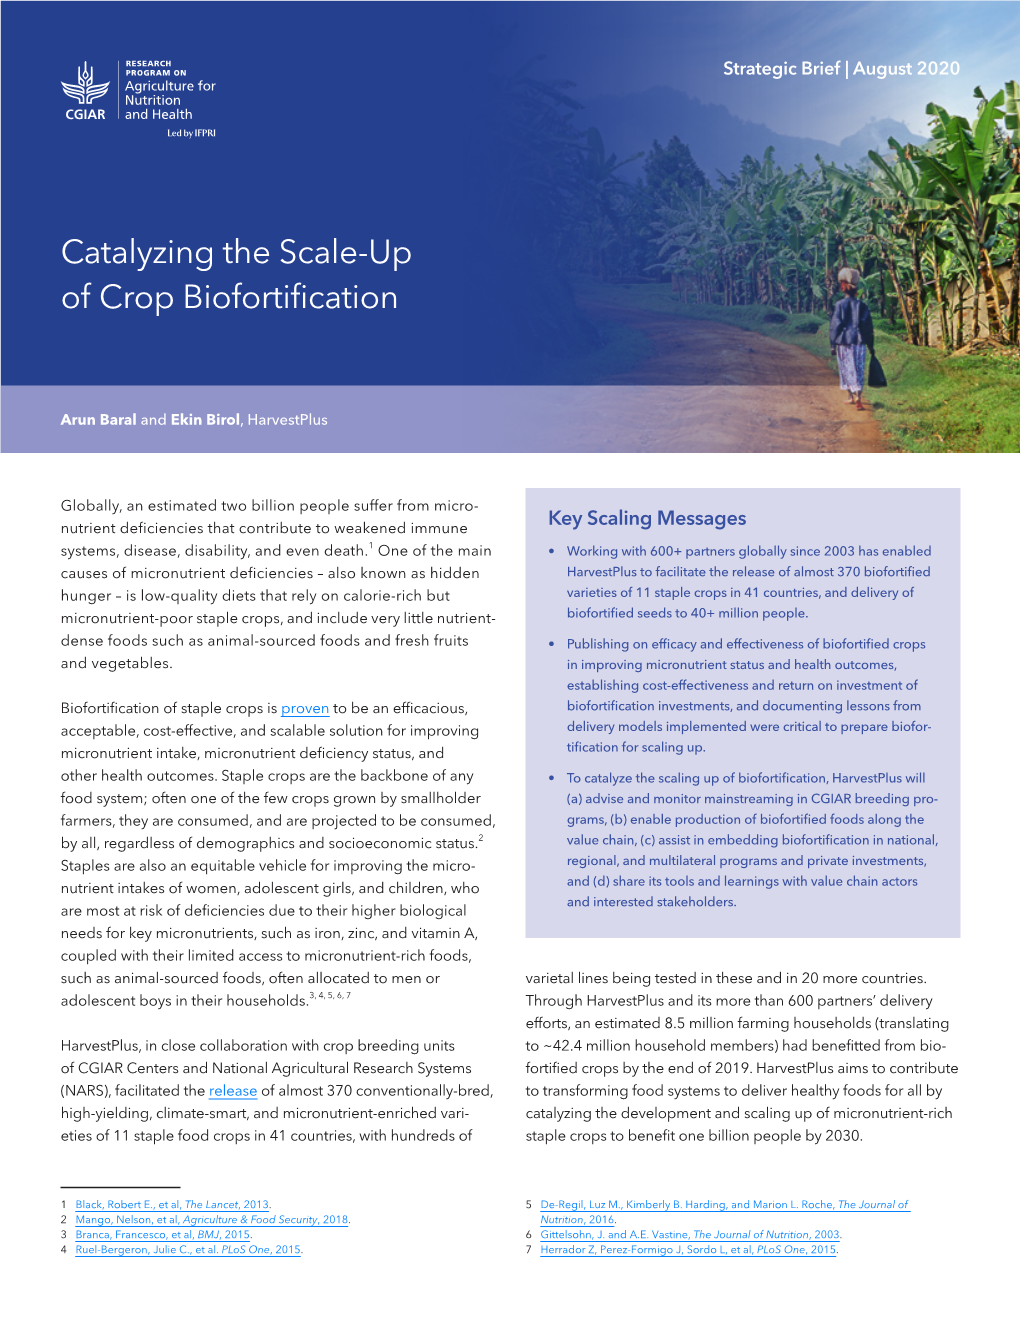 Catalyzing the Scale-Up of Crop Biofortification